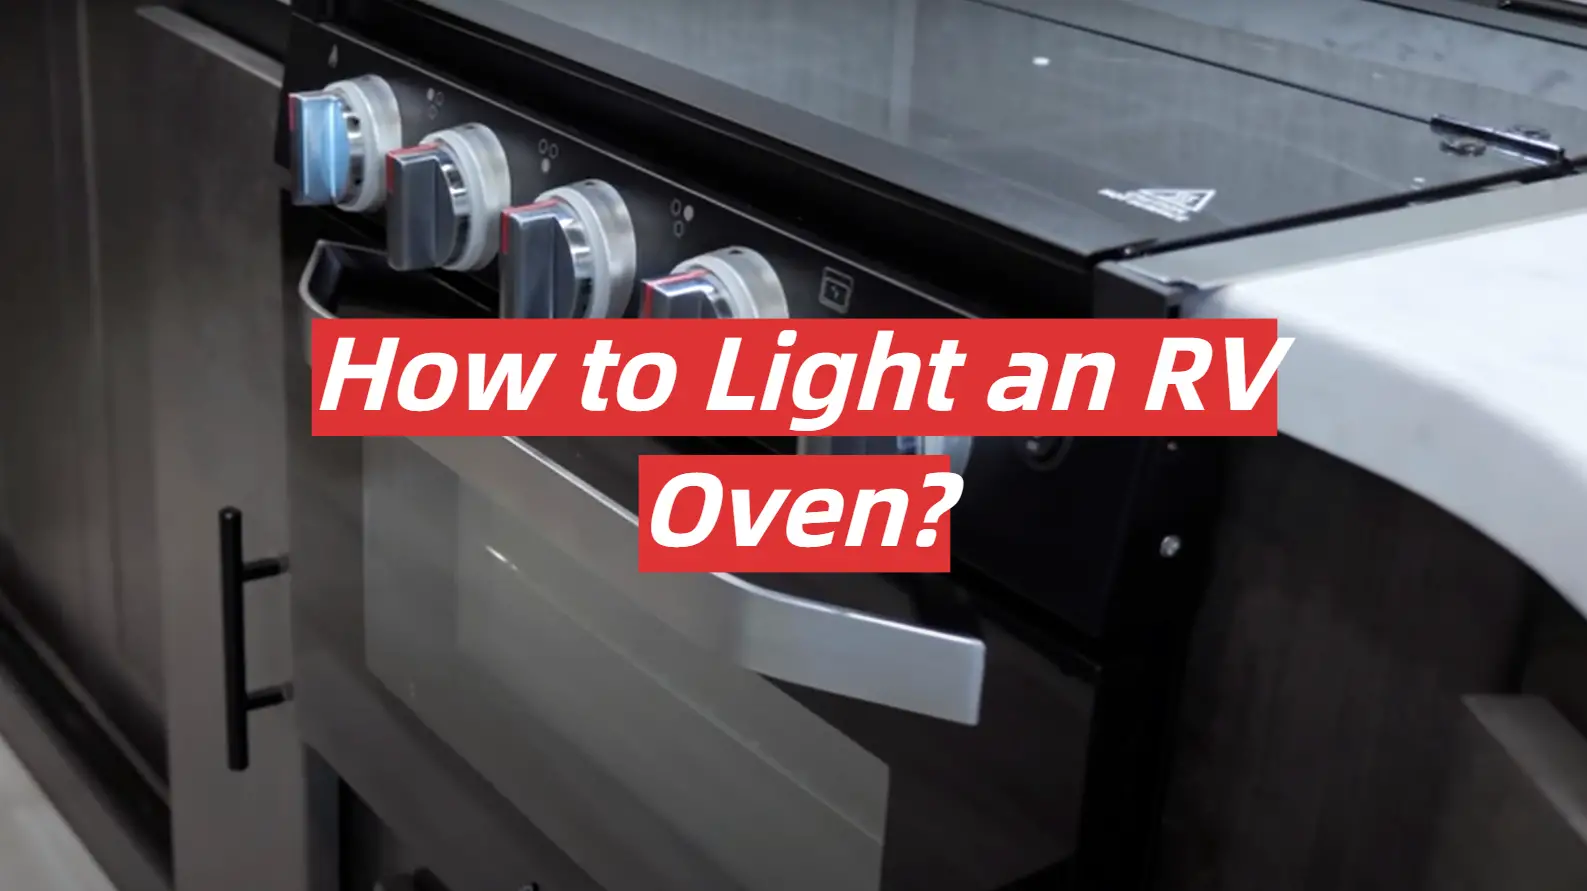 How to Light an RV Oven?